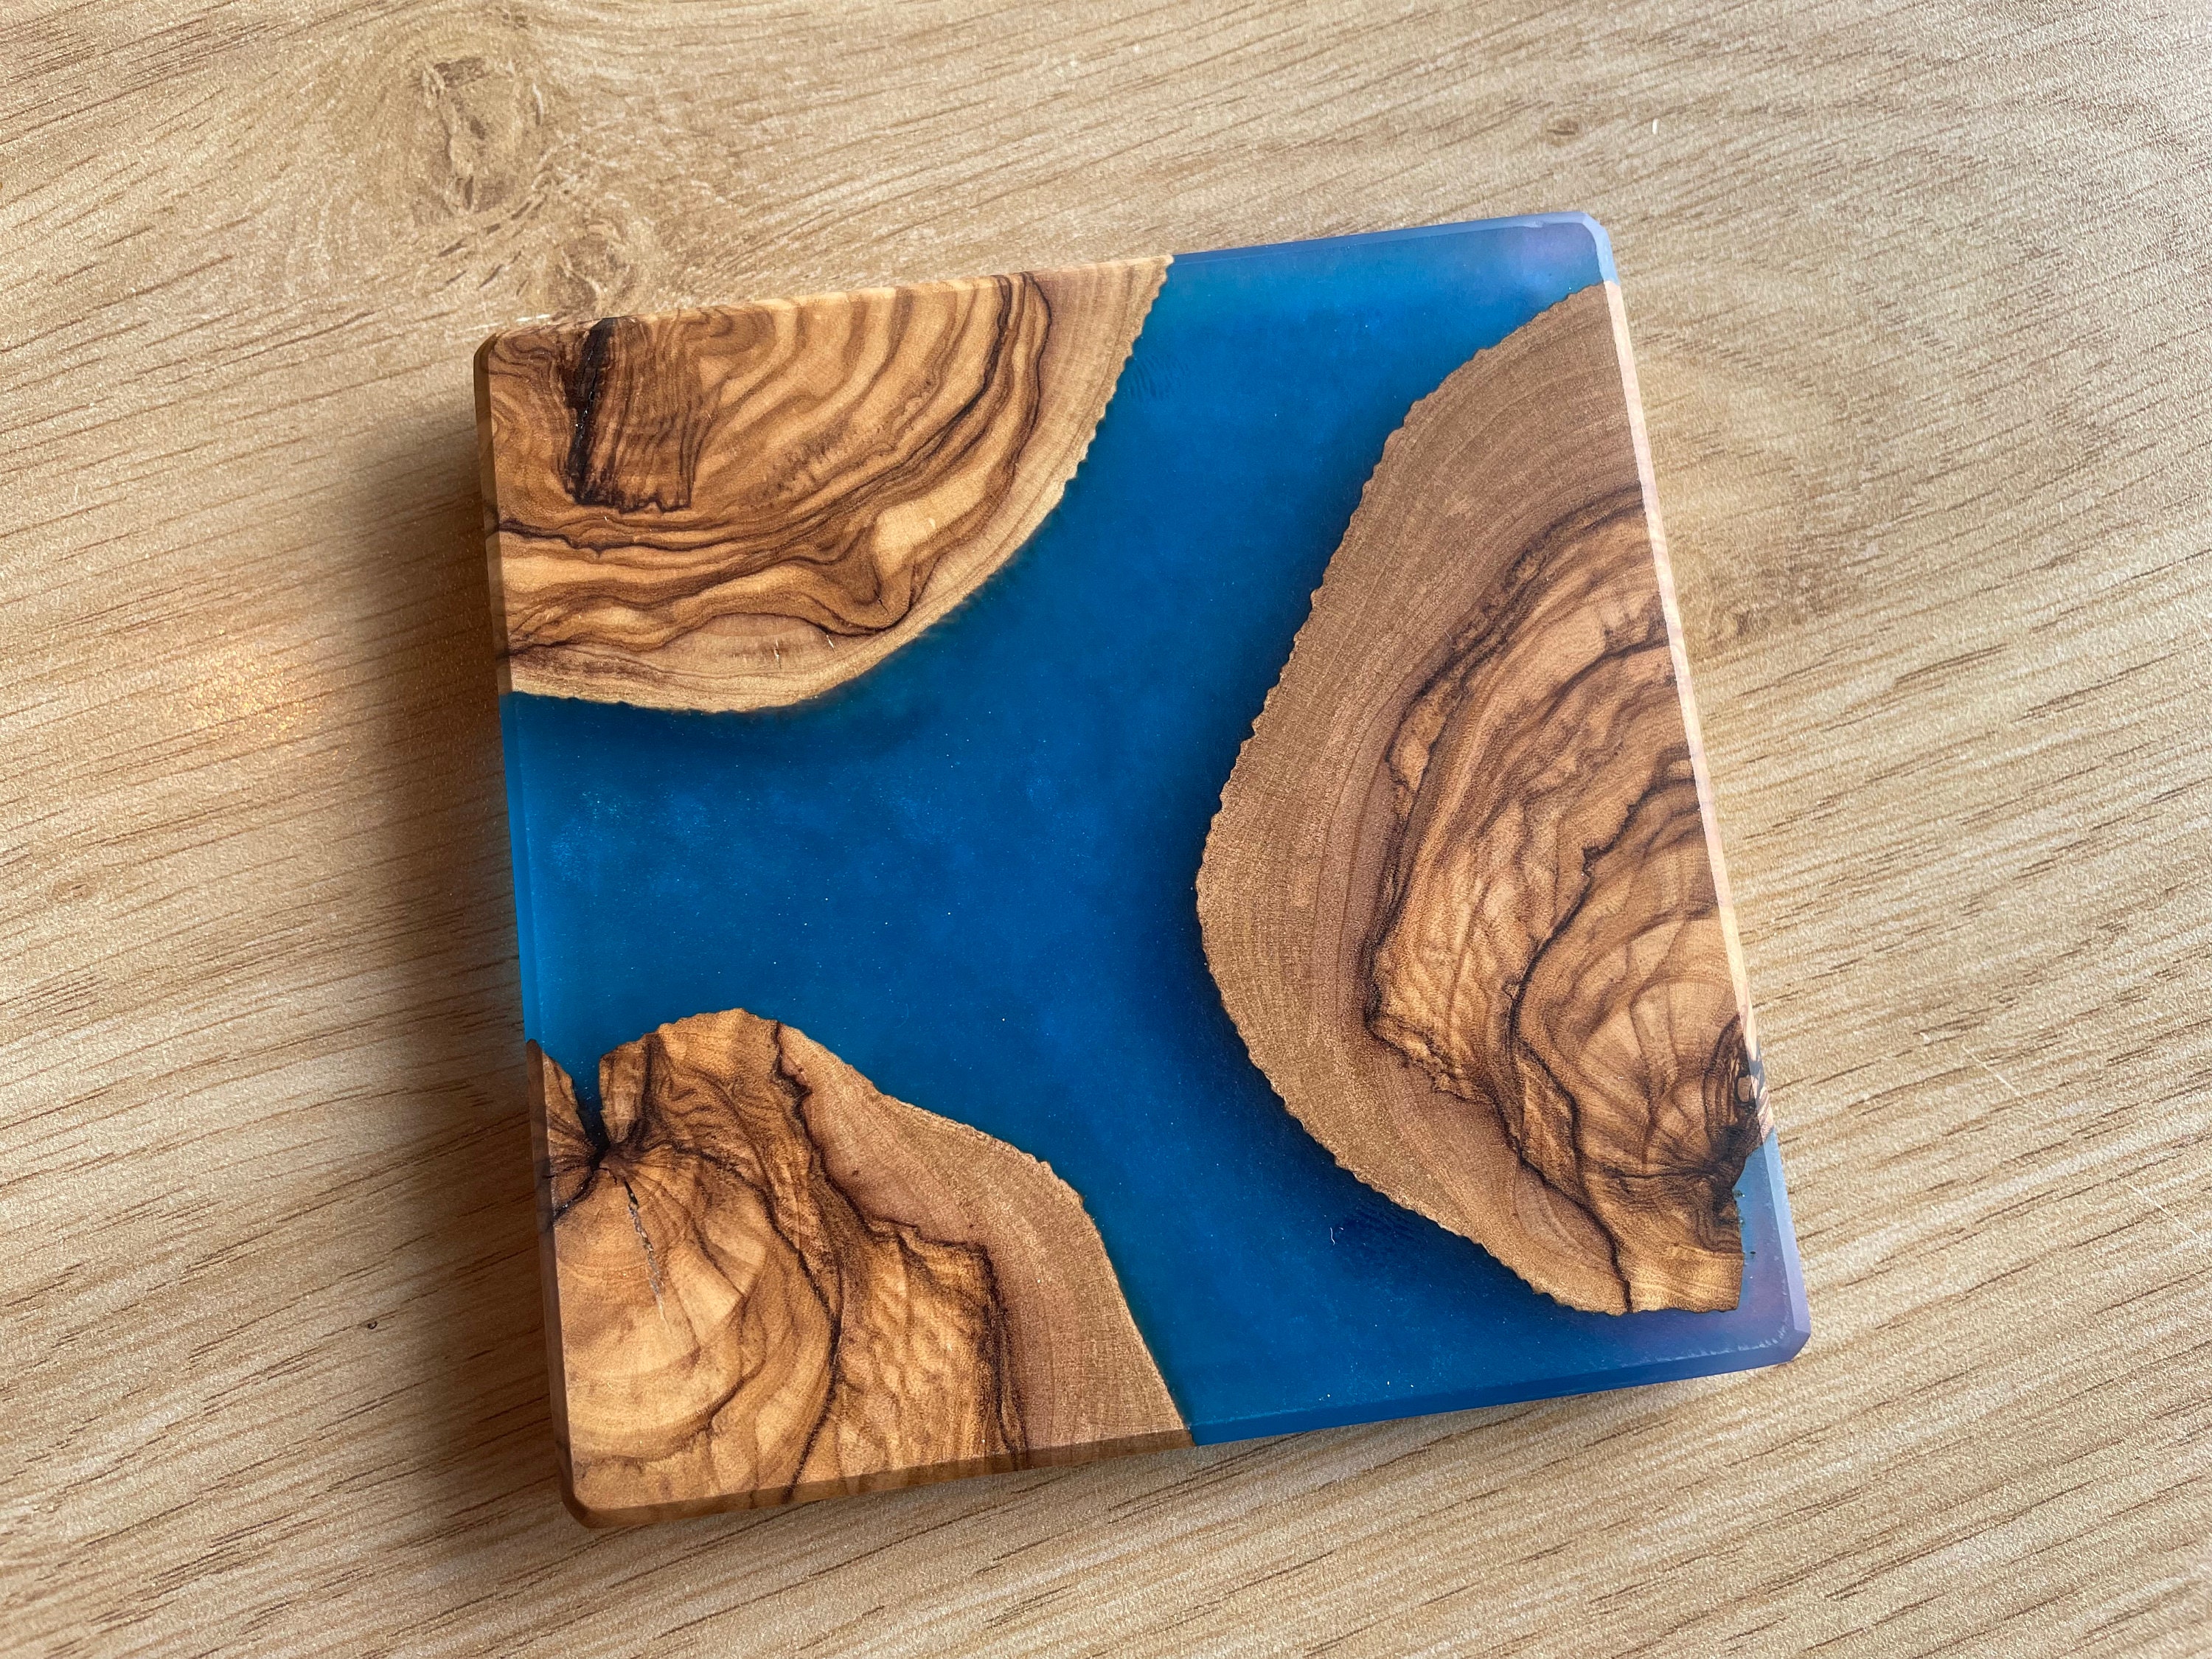 Sold Out-Resin Wooden Coaster Workshop Wednesday March 25th 6:45-8:45pm